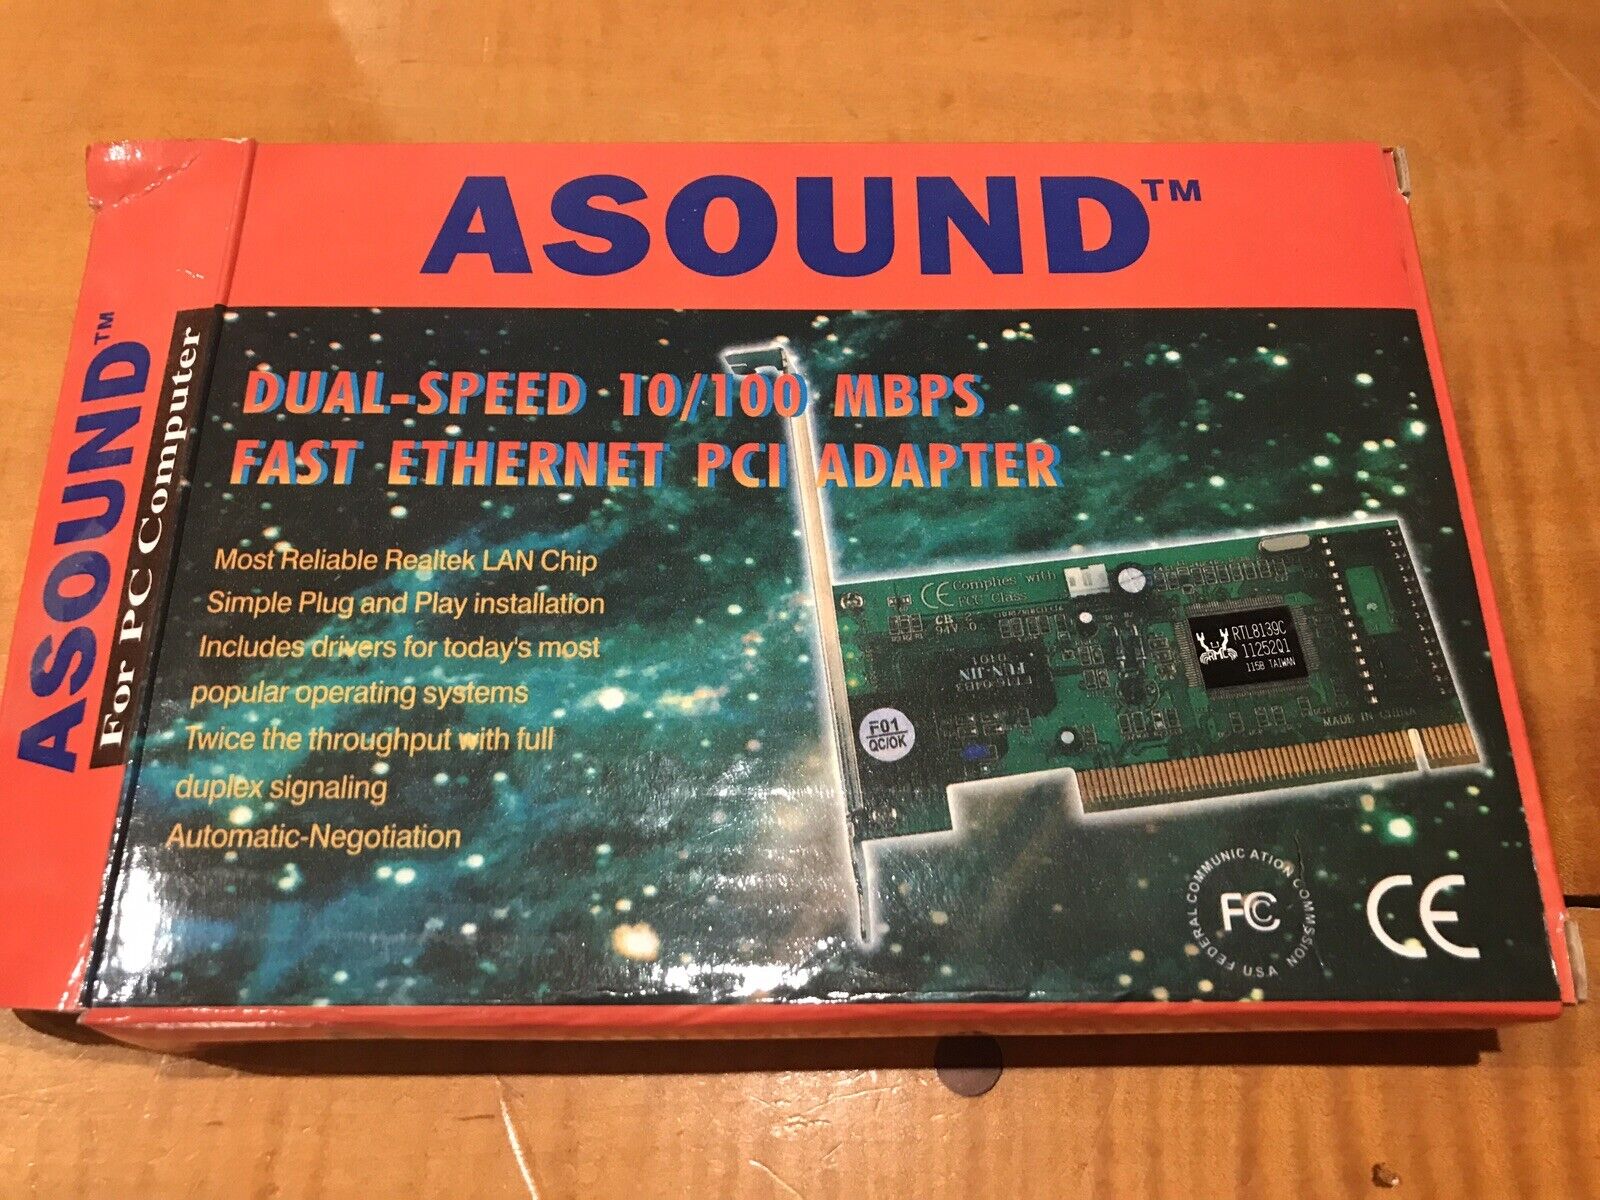 PCI ADAPTER Asound Dual speed 10/100 MBPS Fast Ethernet NOS VINTAGE COMPUTER